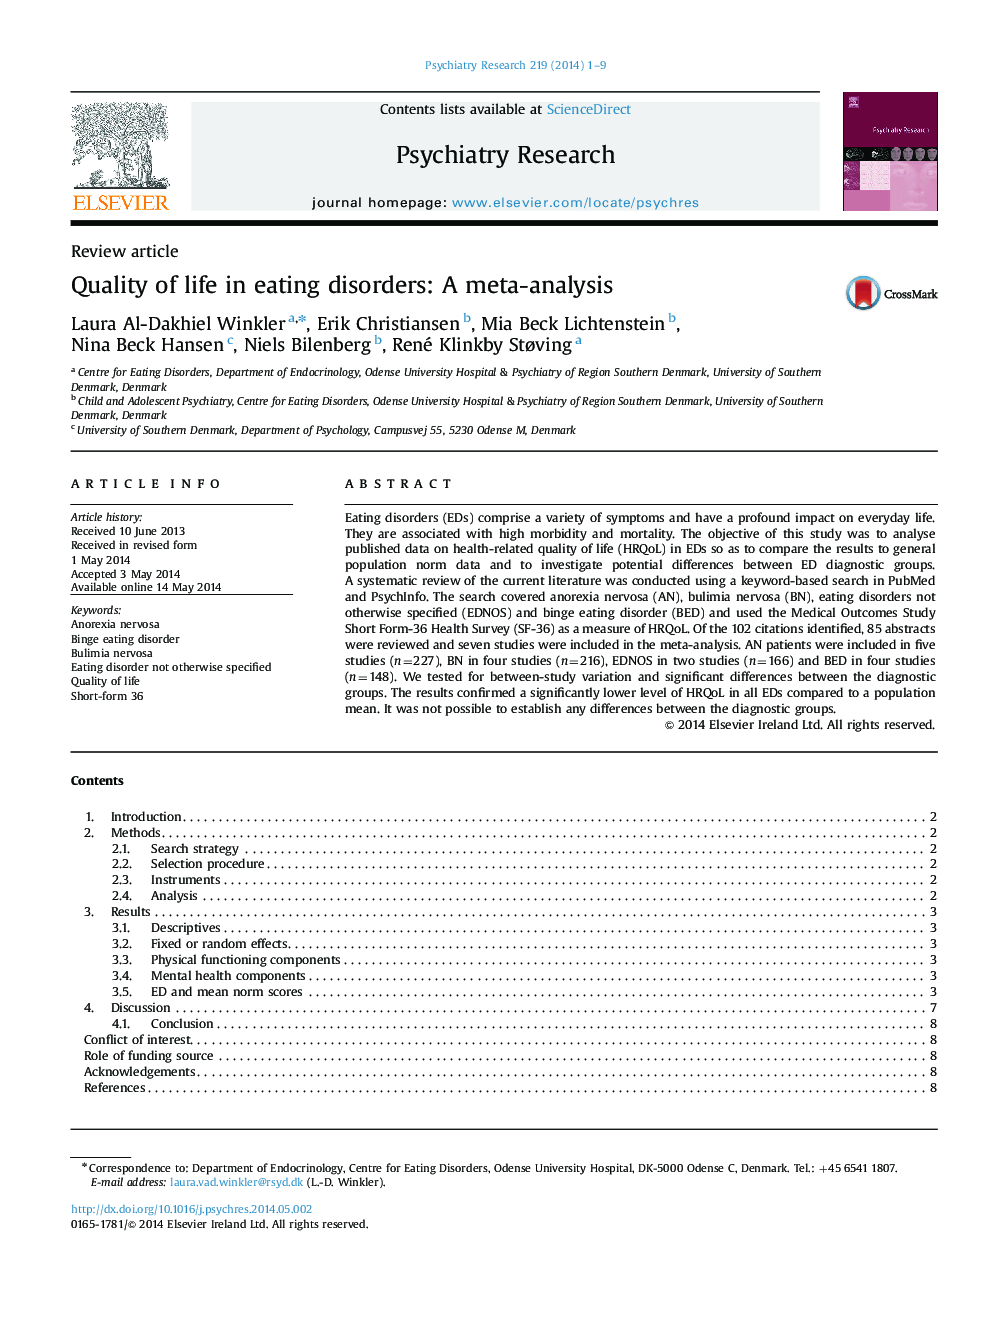 Quality of life in eating disorders: A meta-analysis